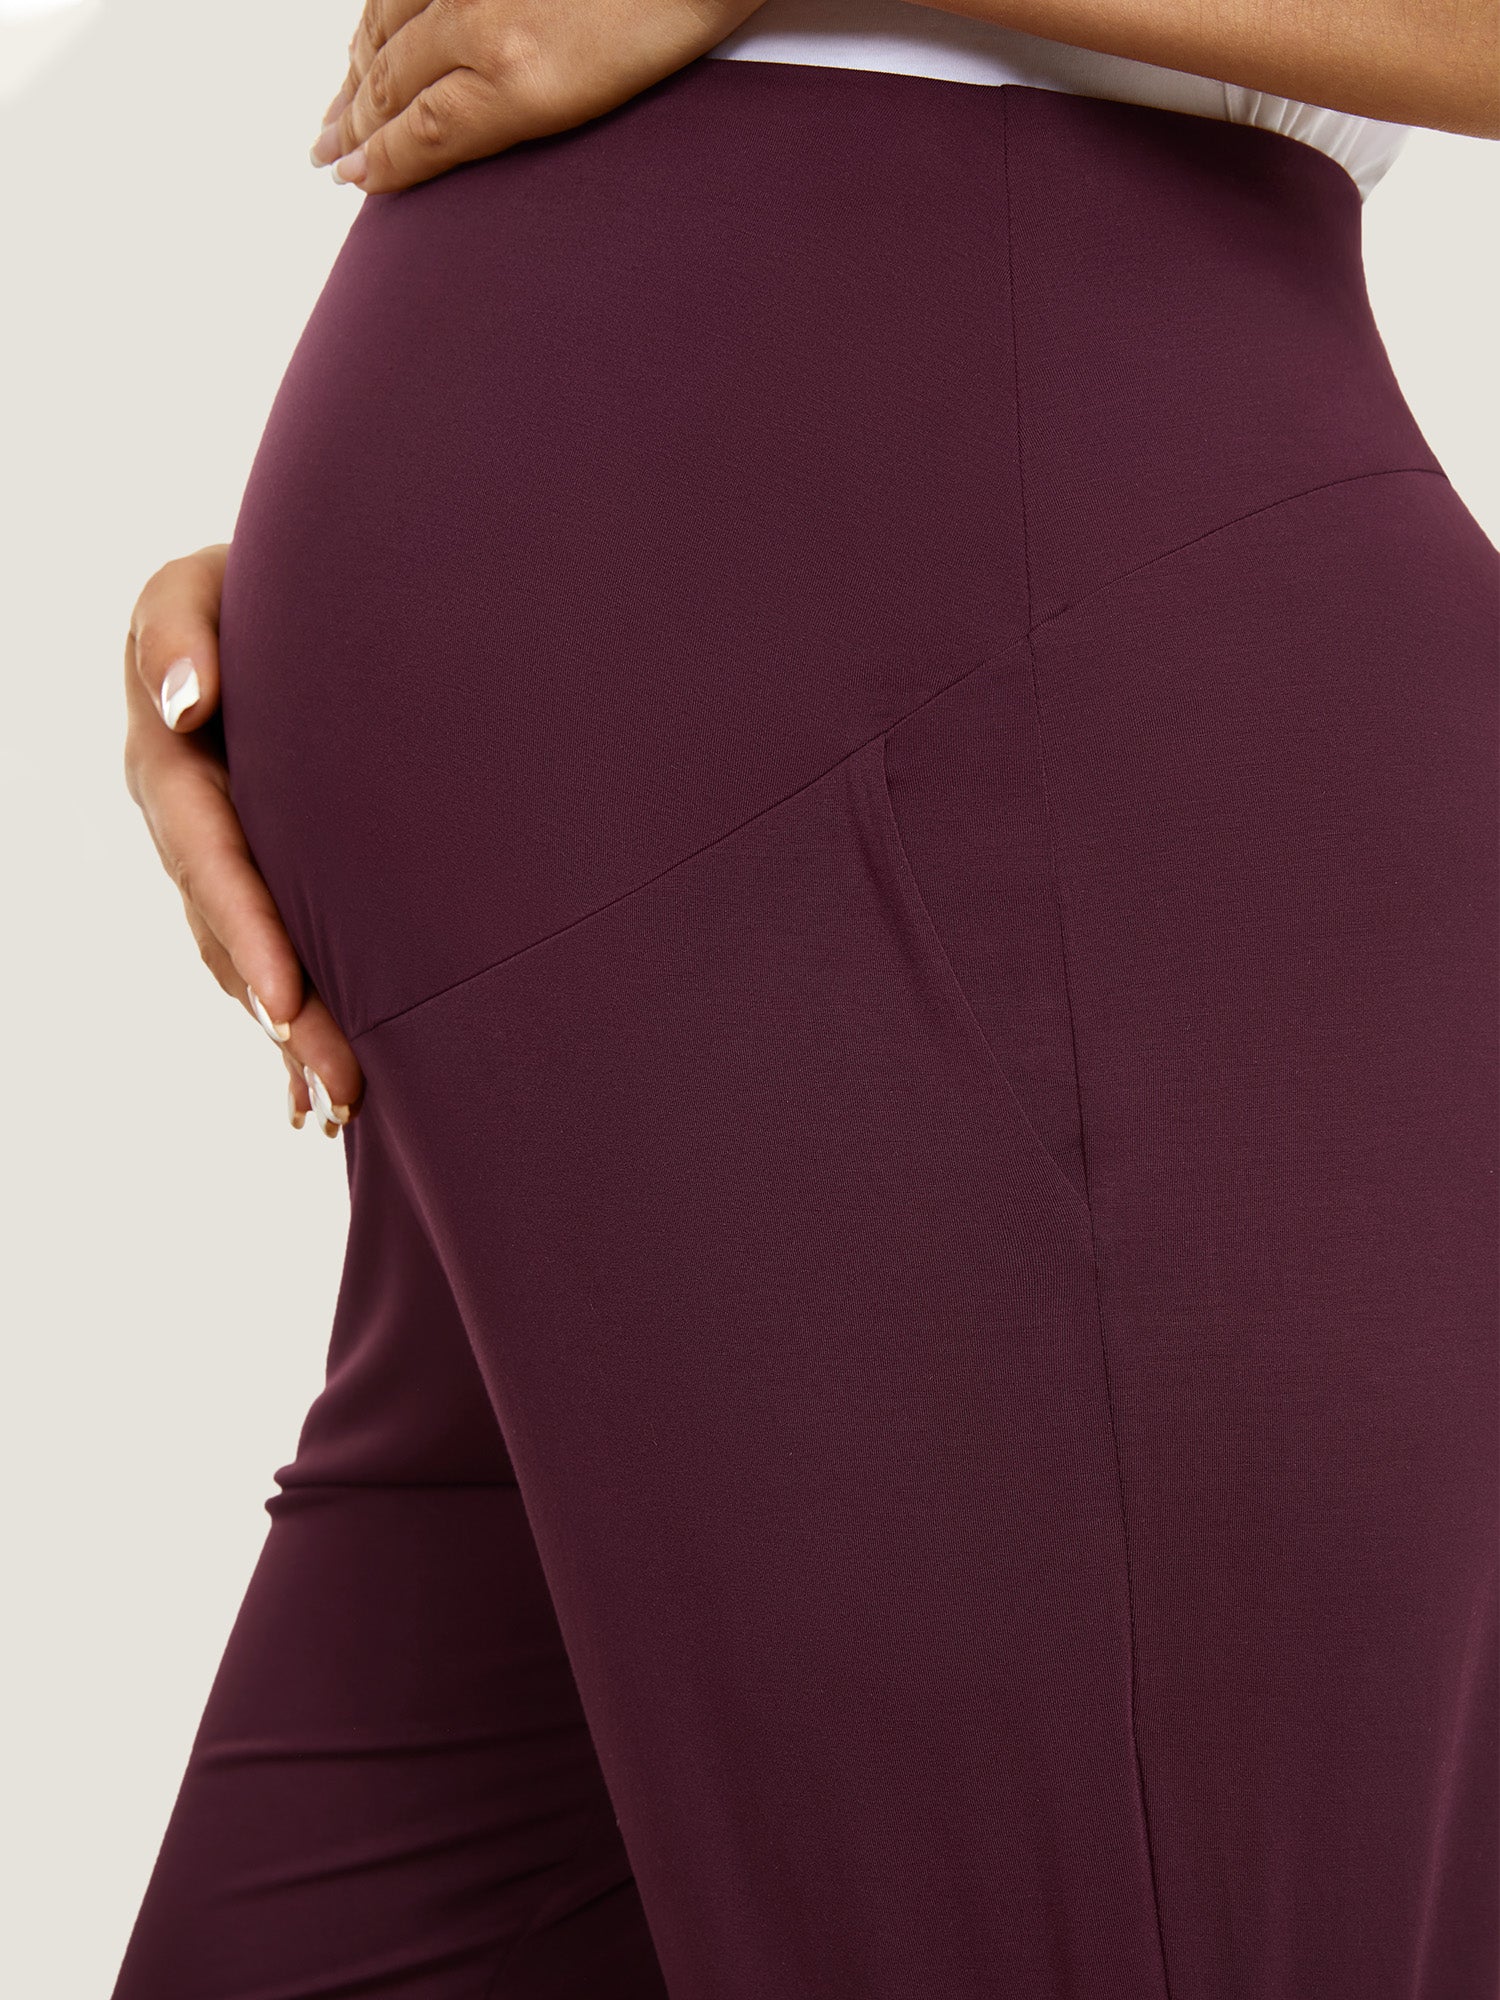 Casual Stretchy Maternity Joggers Burgundy Purple